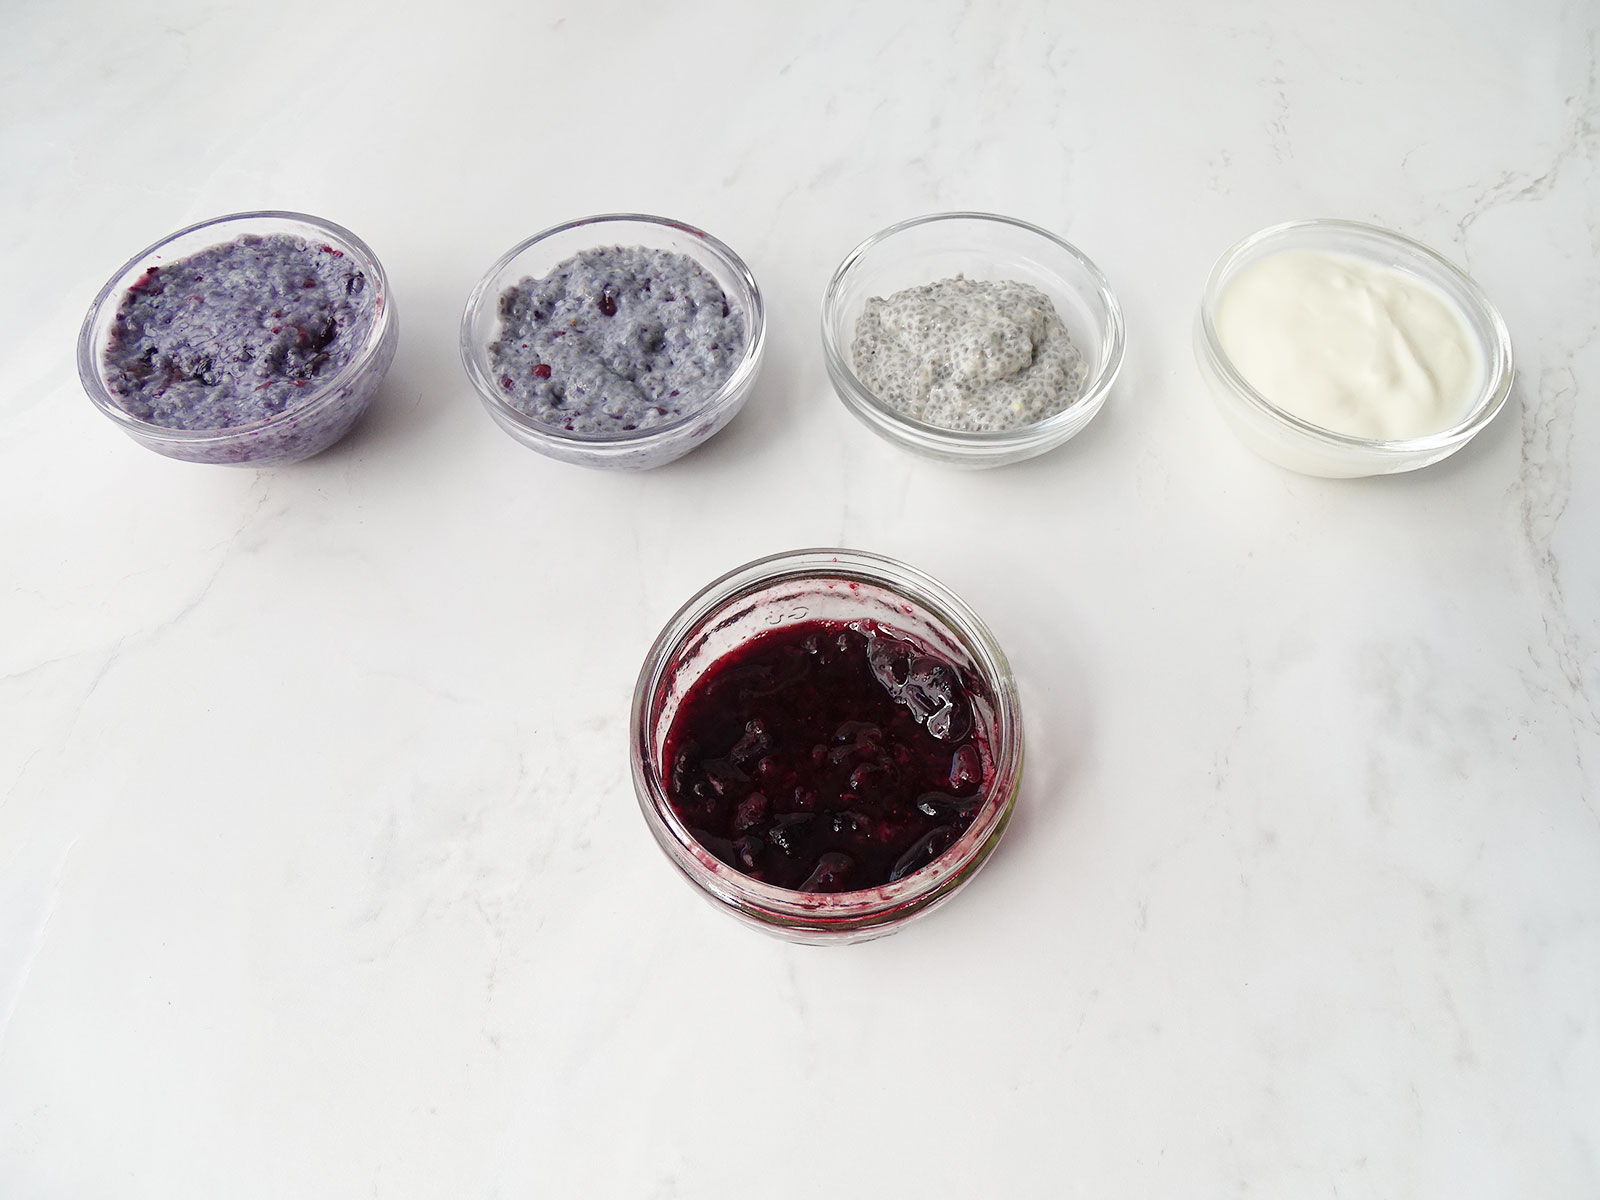 Ombré Blueberry Chia Pudding